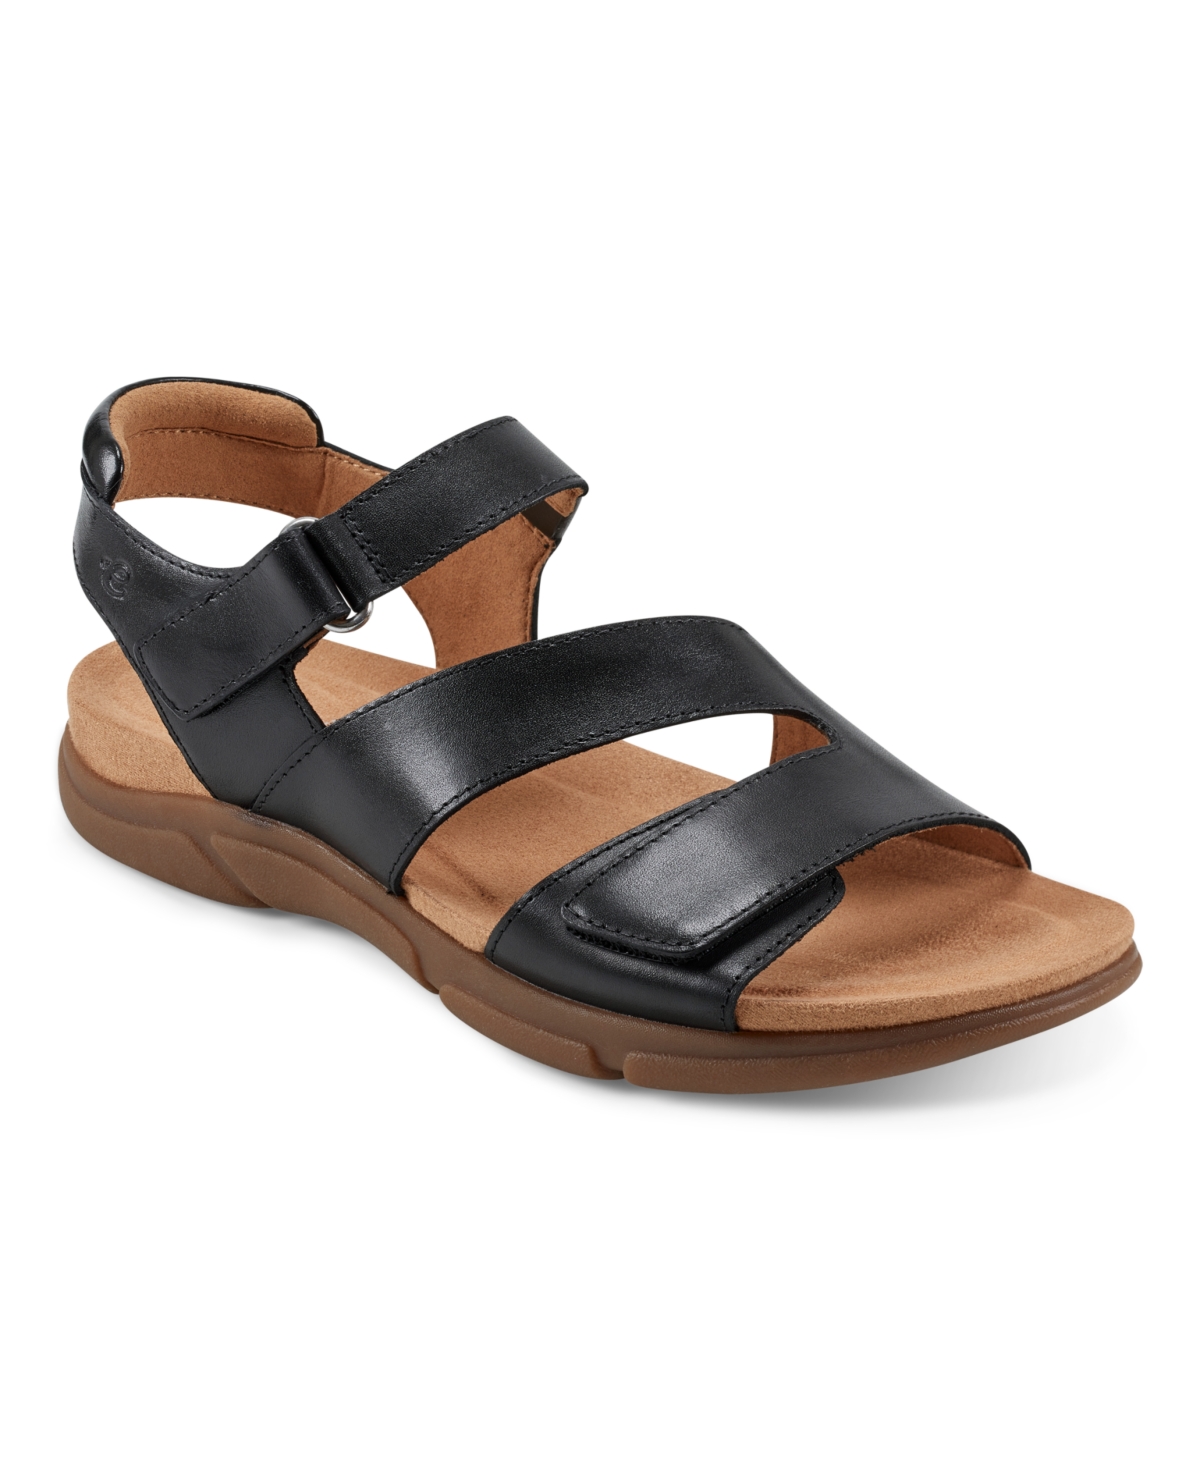 Women's Mavey Round Toe Strappy Casual Sandals - Medium Brown Leather